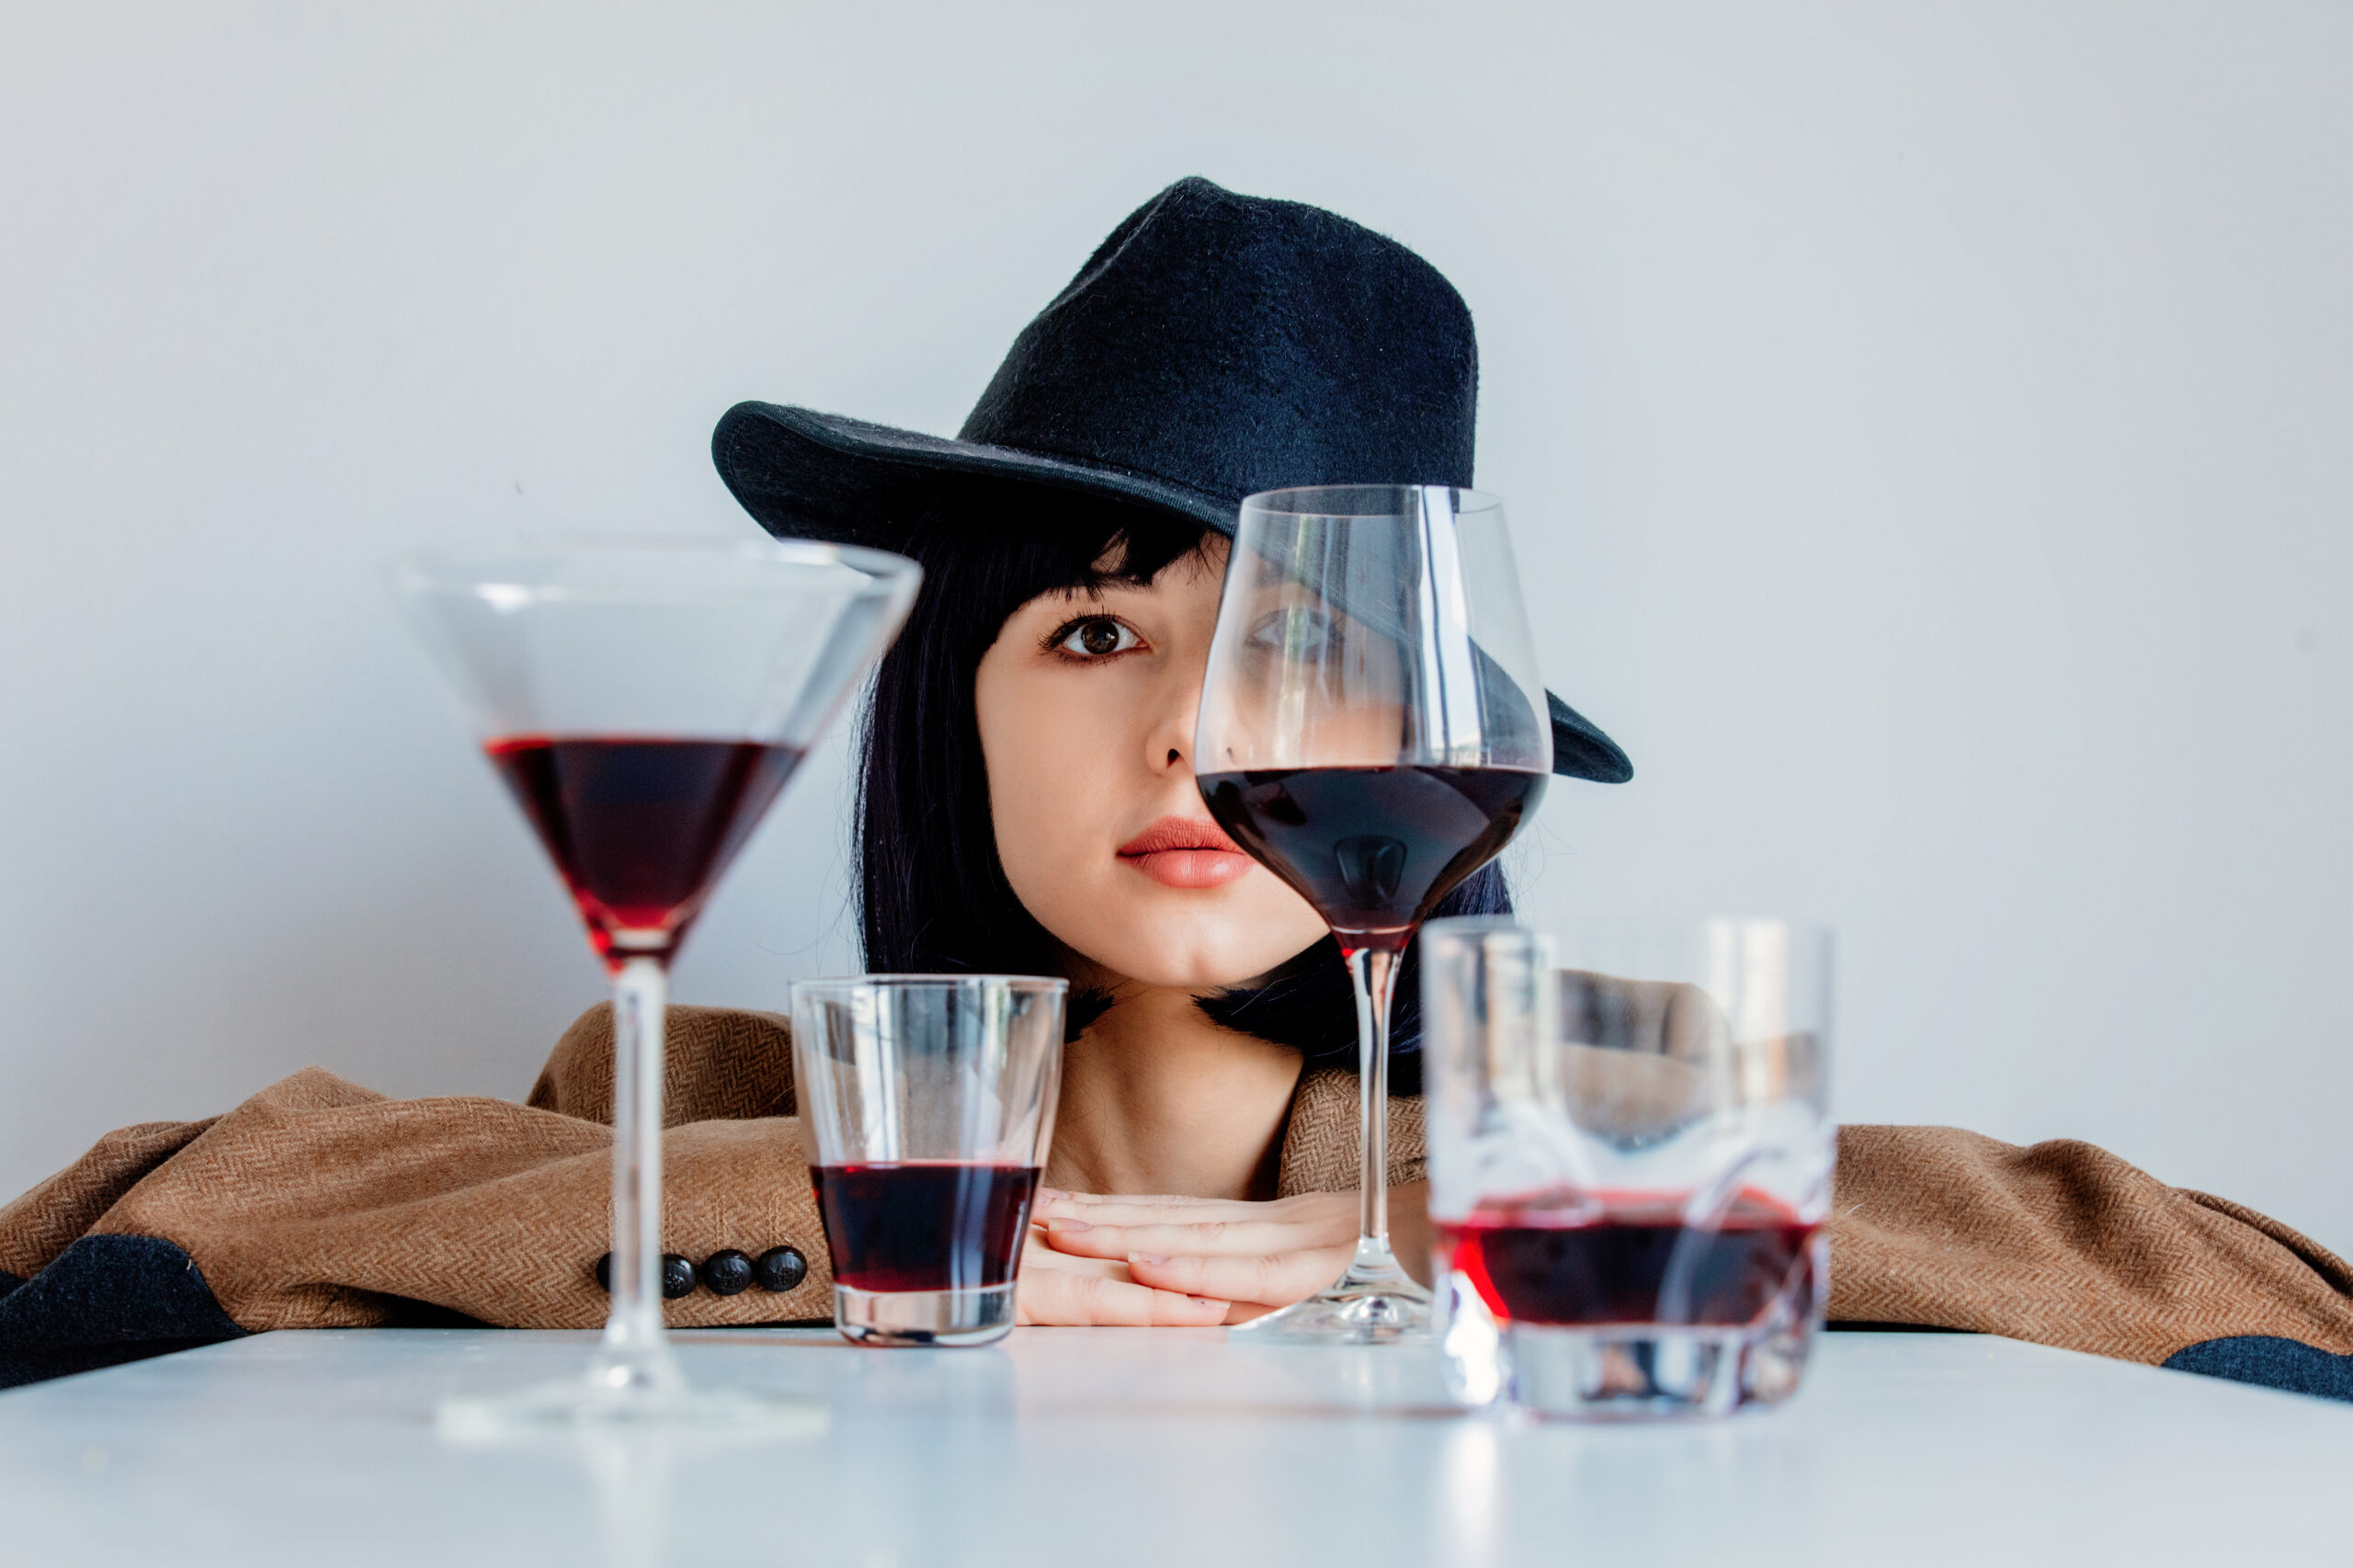 A thoughtful woman examines multiple glasses of wine placed in a row, symbolizing the search for signs of alcoholism.